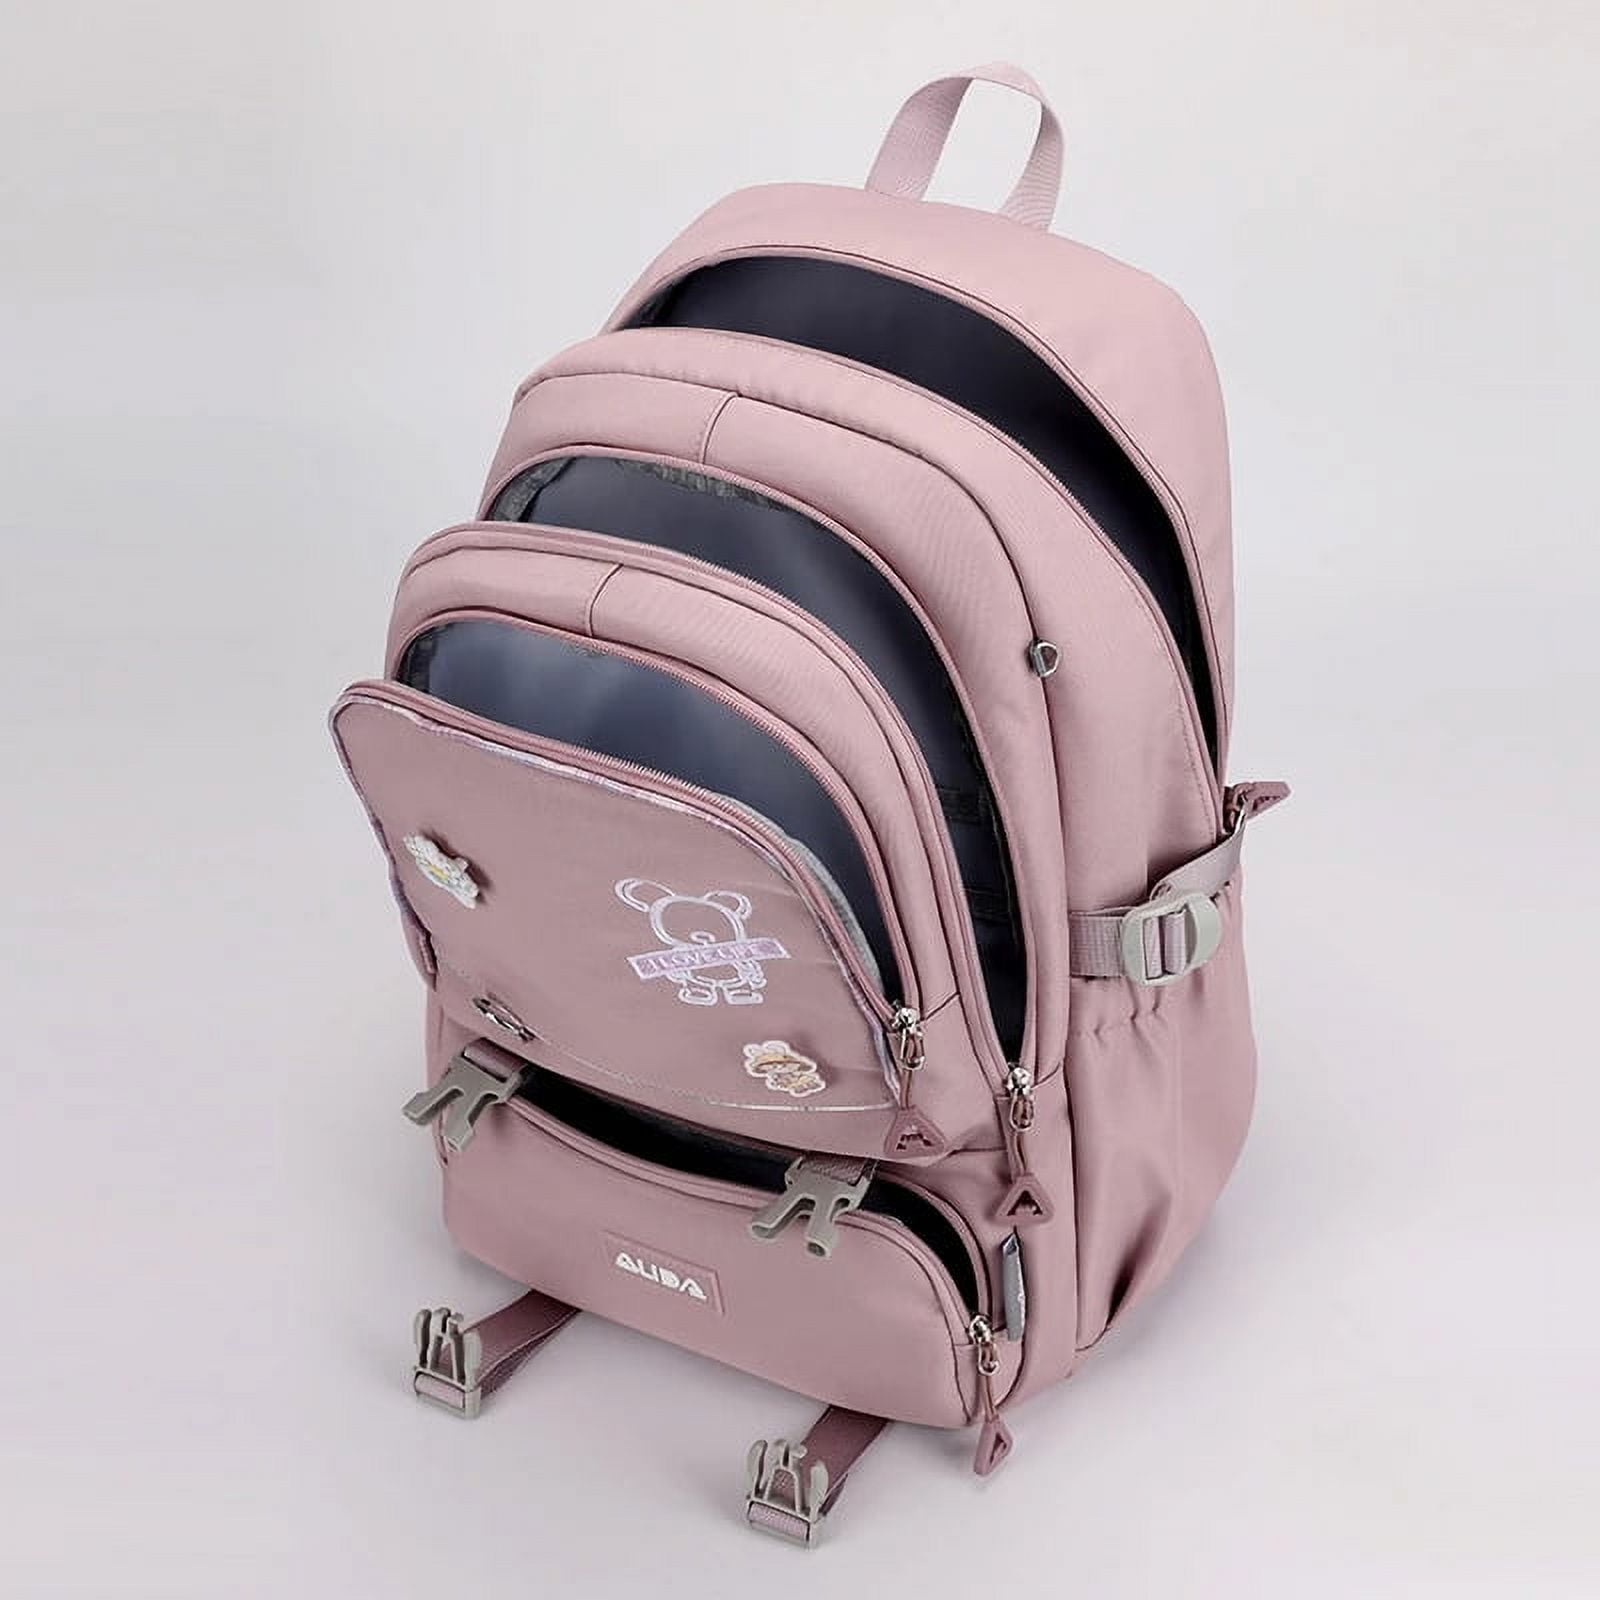 Stylish Pink Backpack Laptop Wanita For College Students Waterproof Nylon  Bag For Women With Cute Design From Bestfashion07, $26.16